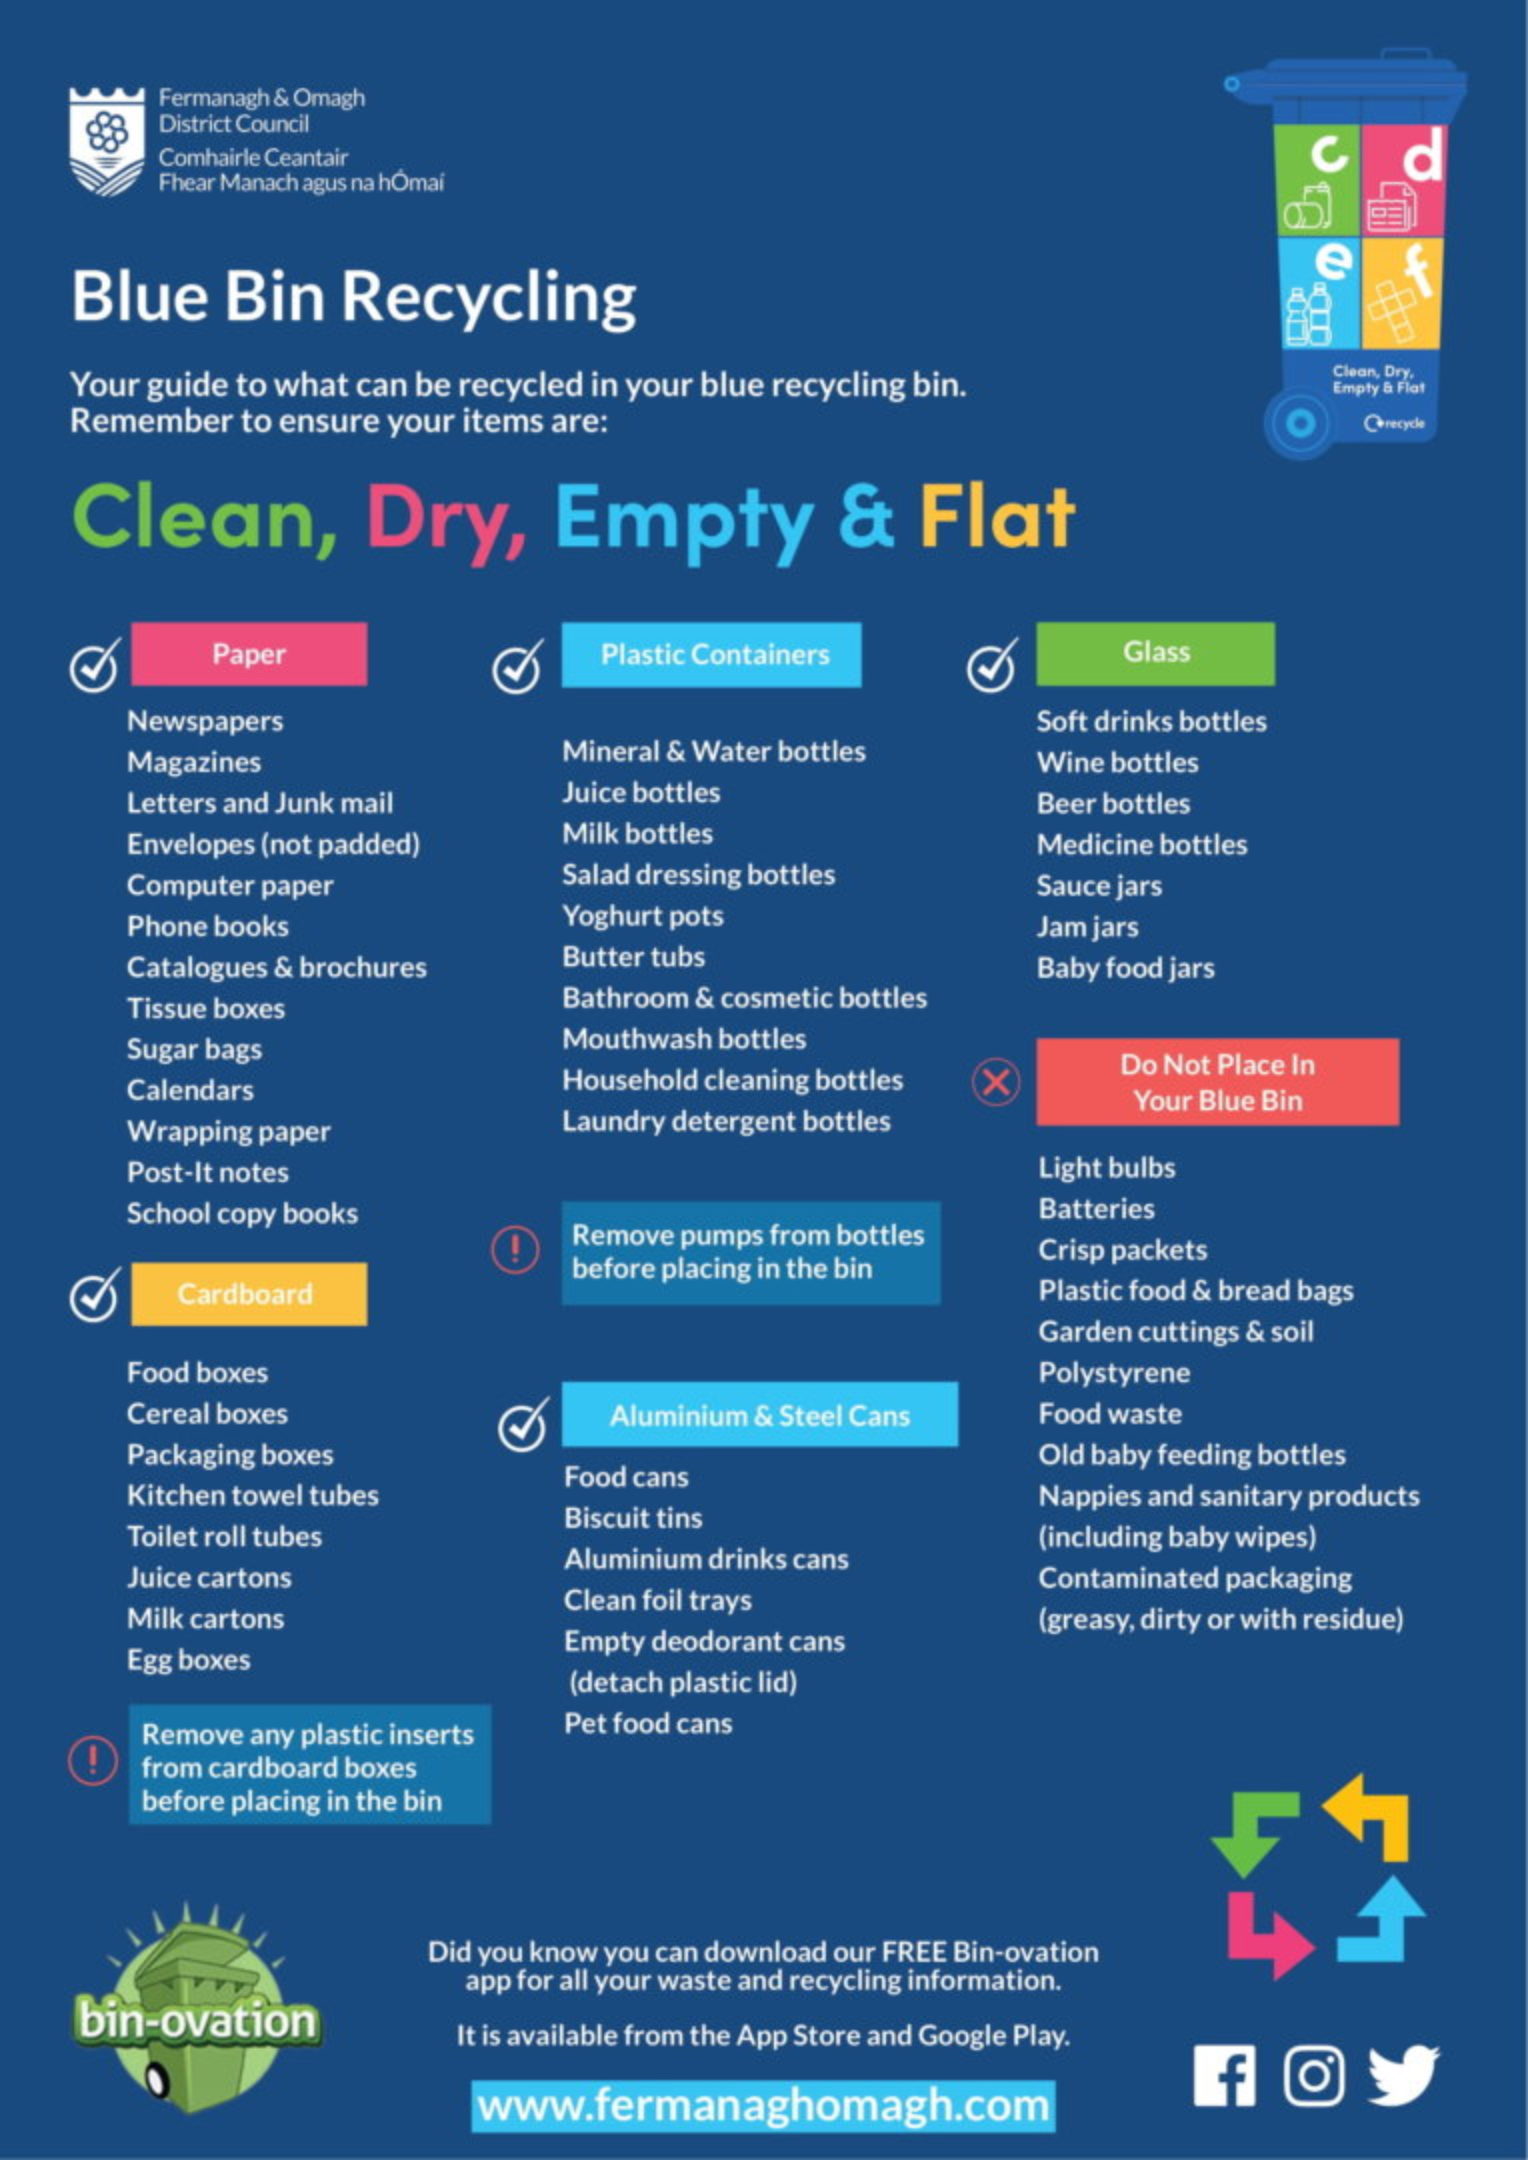 Blue bin recycling Clean, Dry, Empty and Flat Fermanagh & Omagh